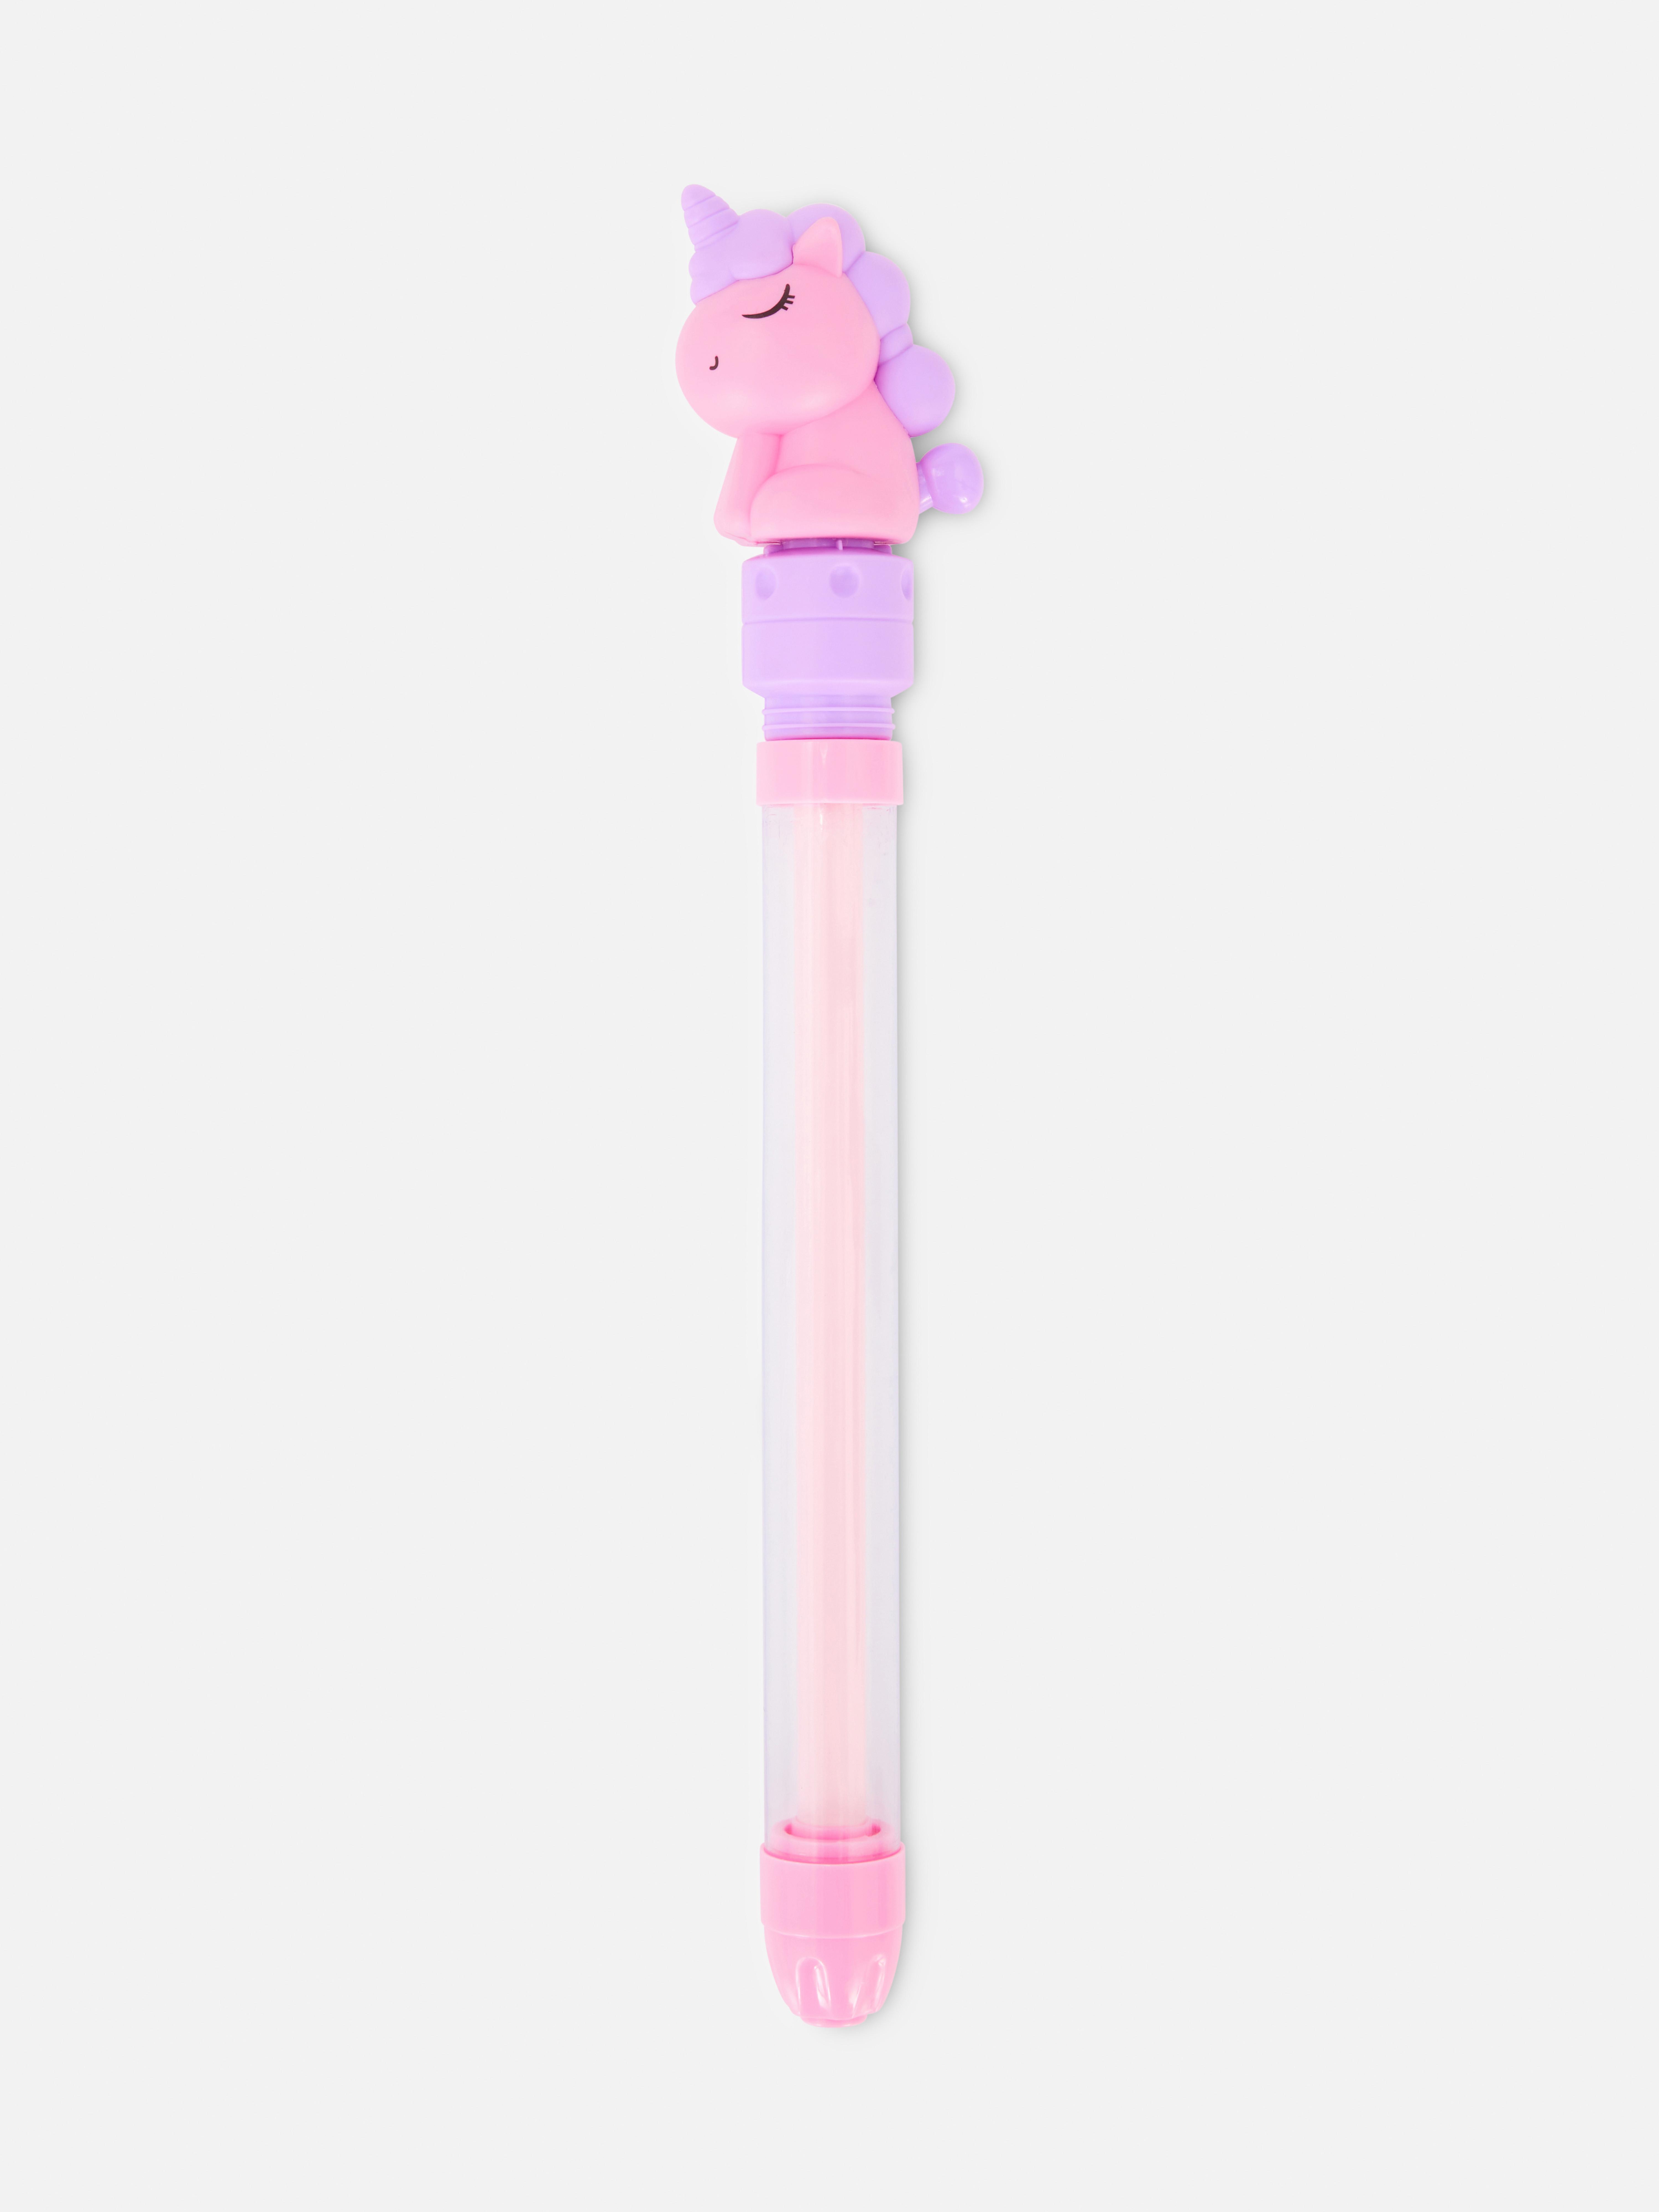 Novelty Water Shooter Toy